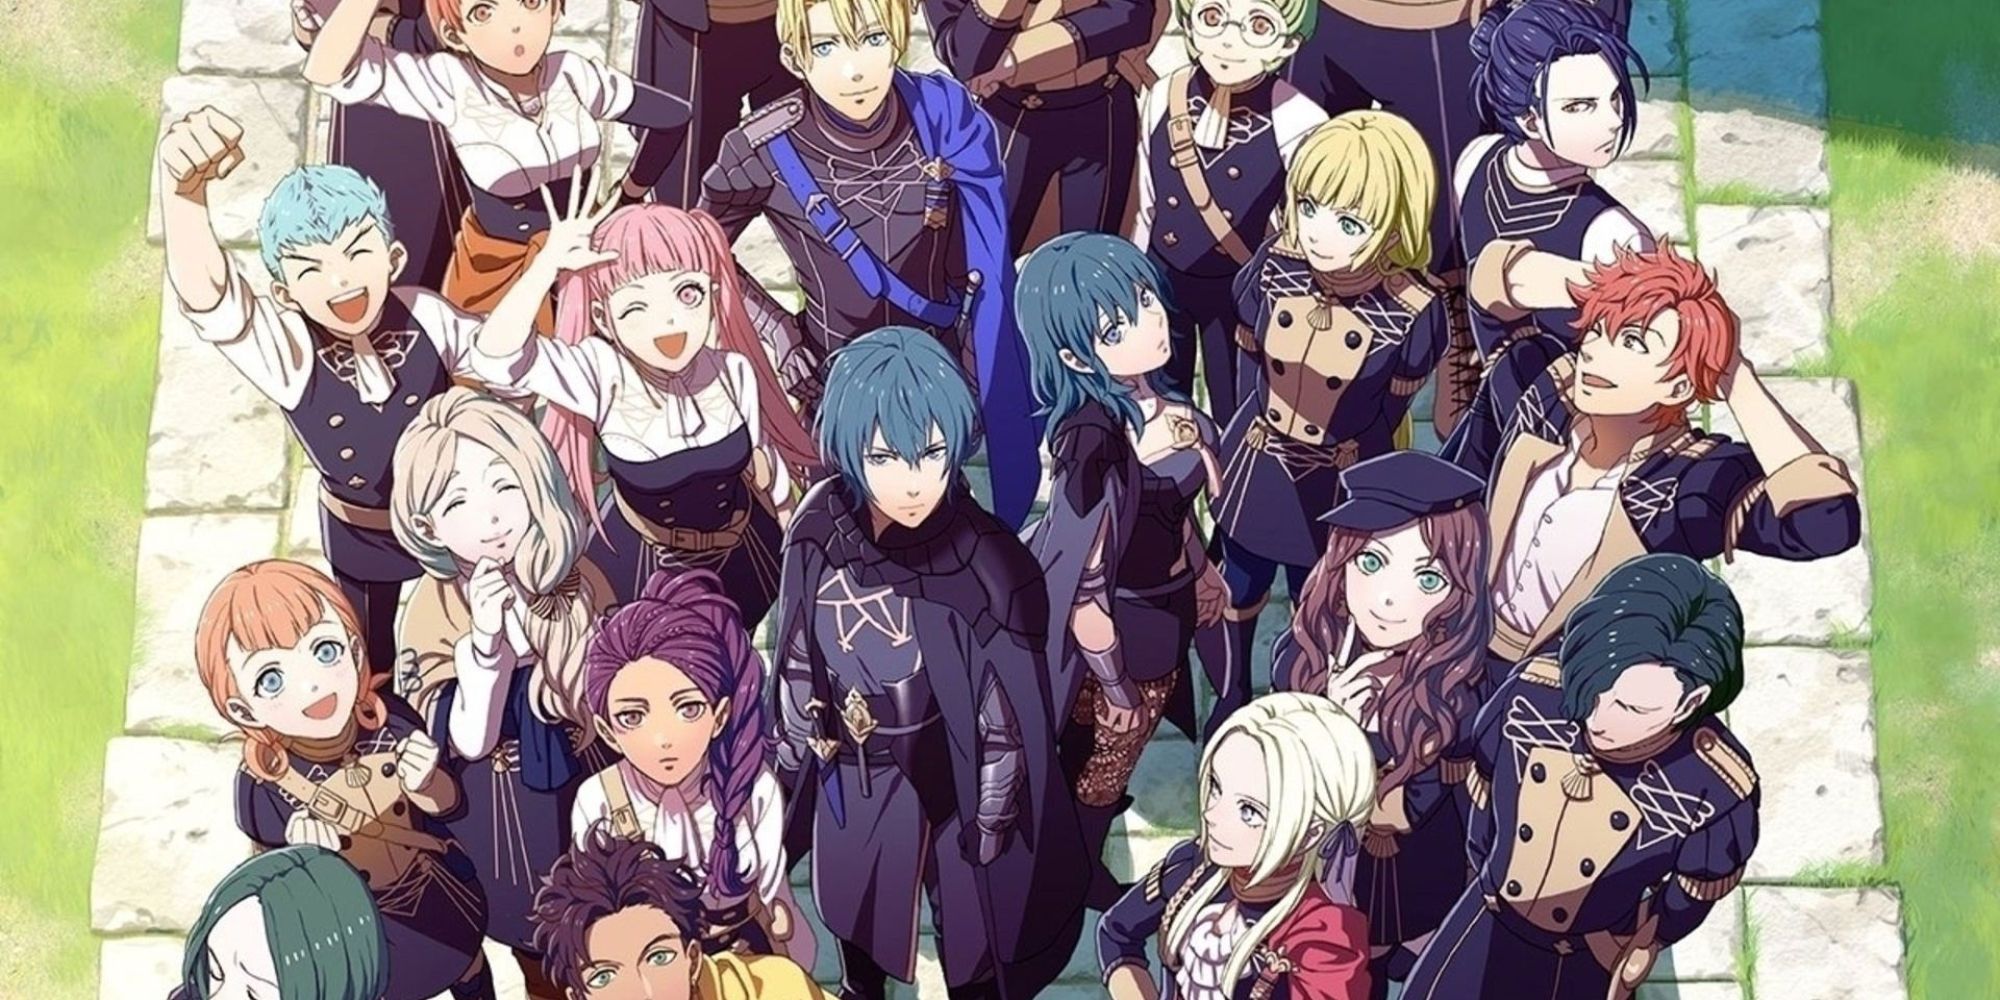 Male and Female Byleth stand on a path surrounded by their students